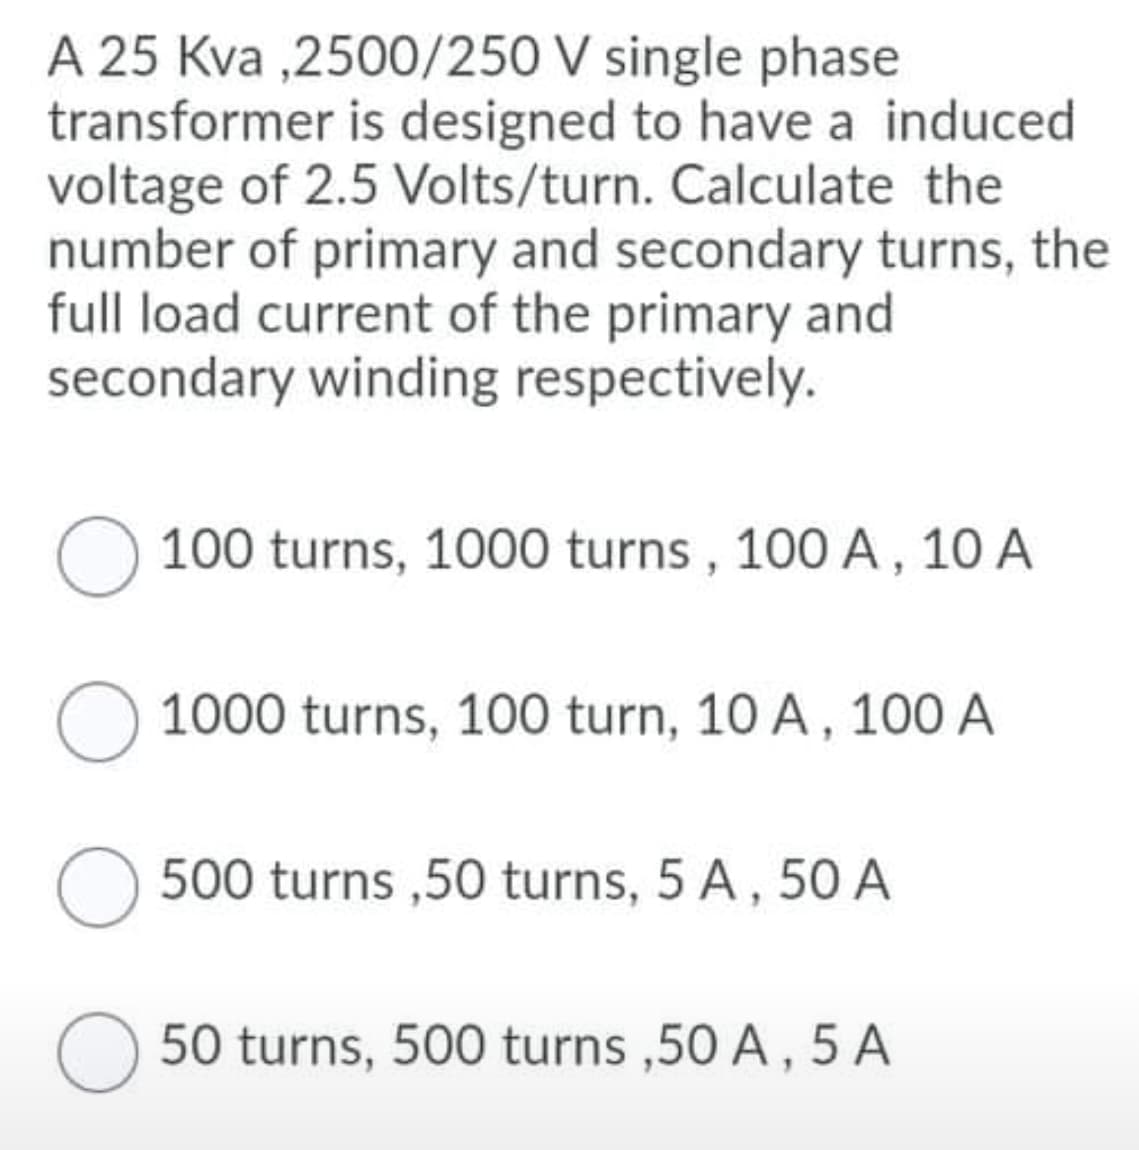 A 25 Kva ,2500/250 V single phase
transformer is designed to have a induced
voltage of 2.5 Volts/turn. Calculate the
number of primary and secondary turns, the
full load current of the primary and
secondary winding respectively.
100 turns, 1000 turns , 100 A, 10 A
1000 turns, 100 turn, 10 A, 10O A
500 turns ,50 turns, 5 A, 50 A
50 turns, 500 turns ,50 A, 5 A
